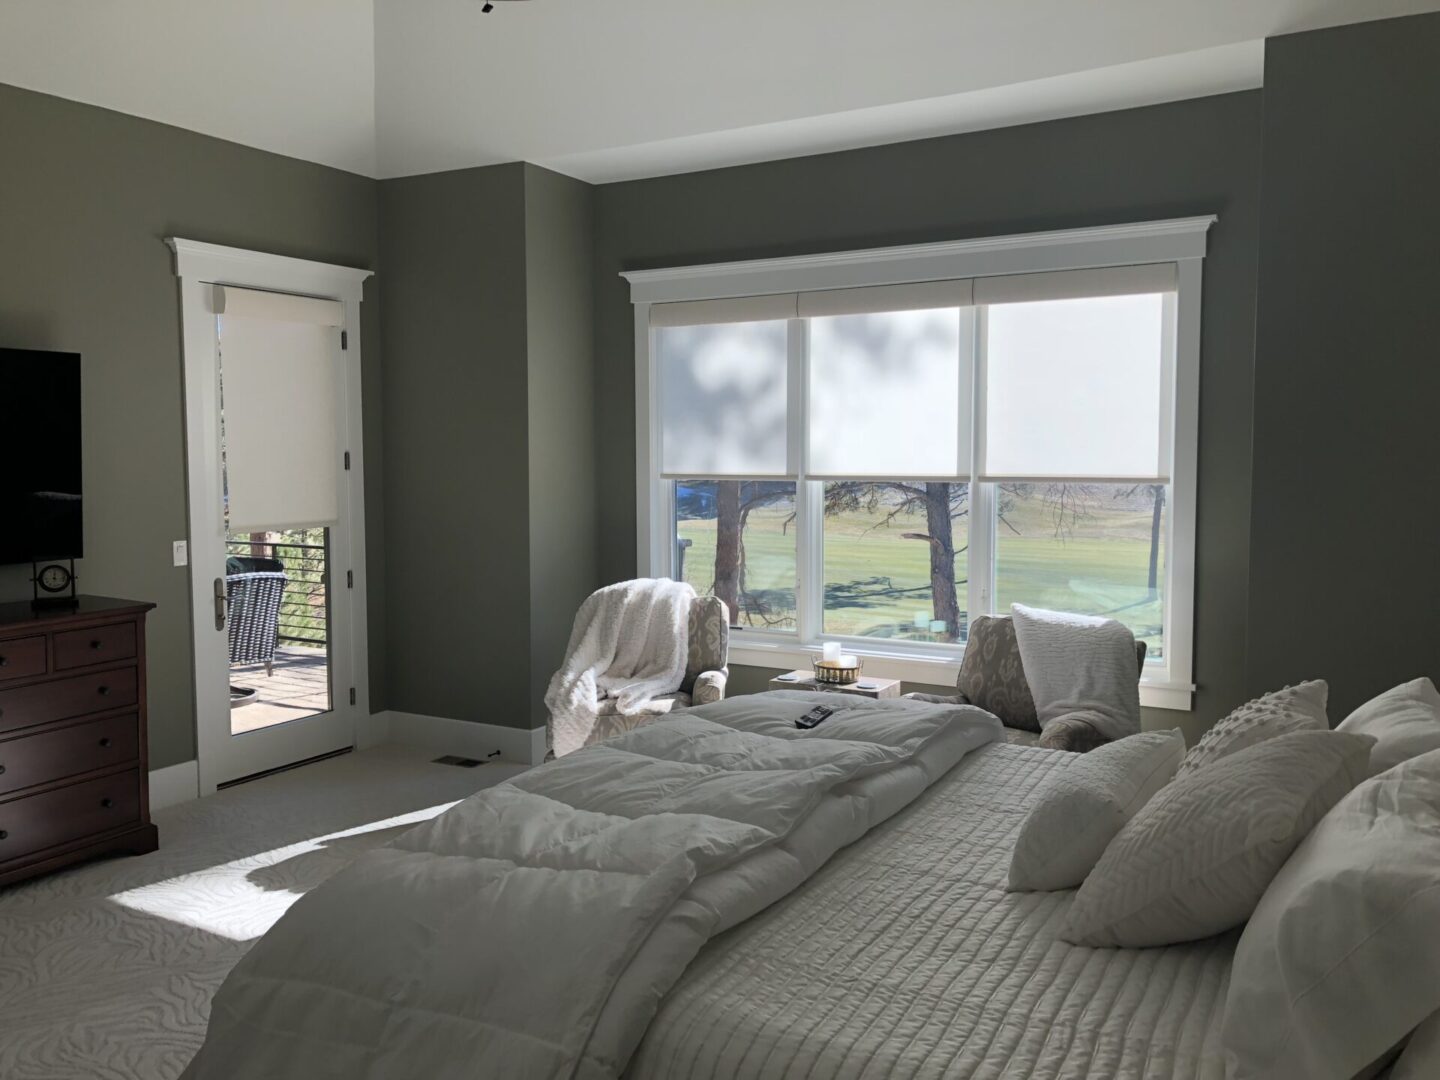 Image of white shades in bedroom